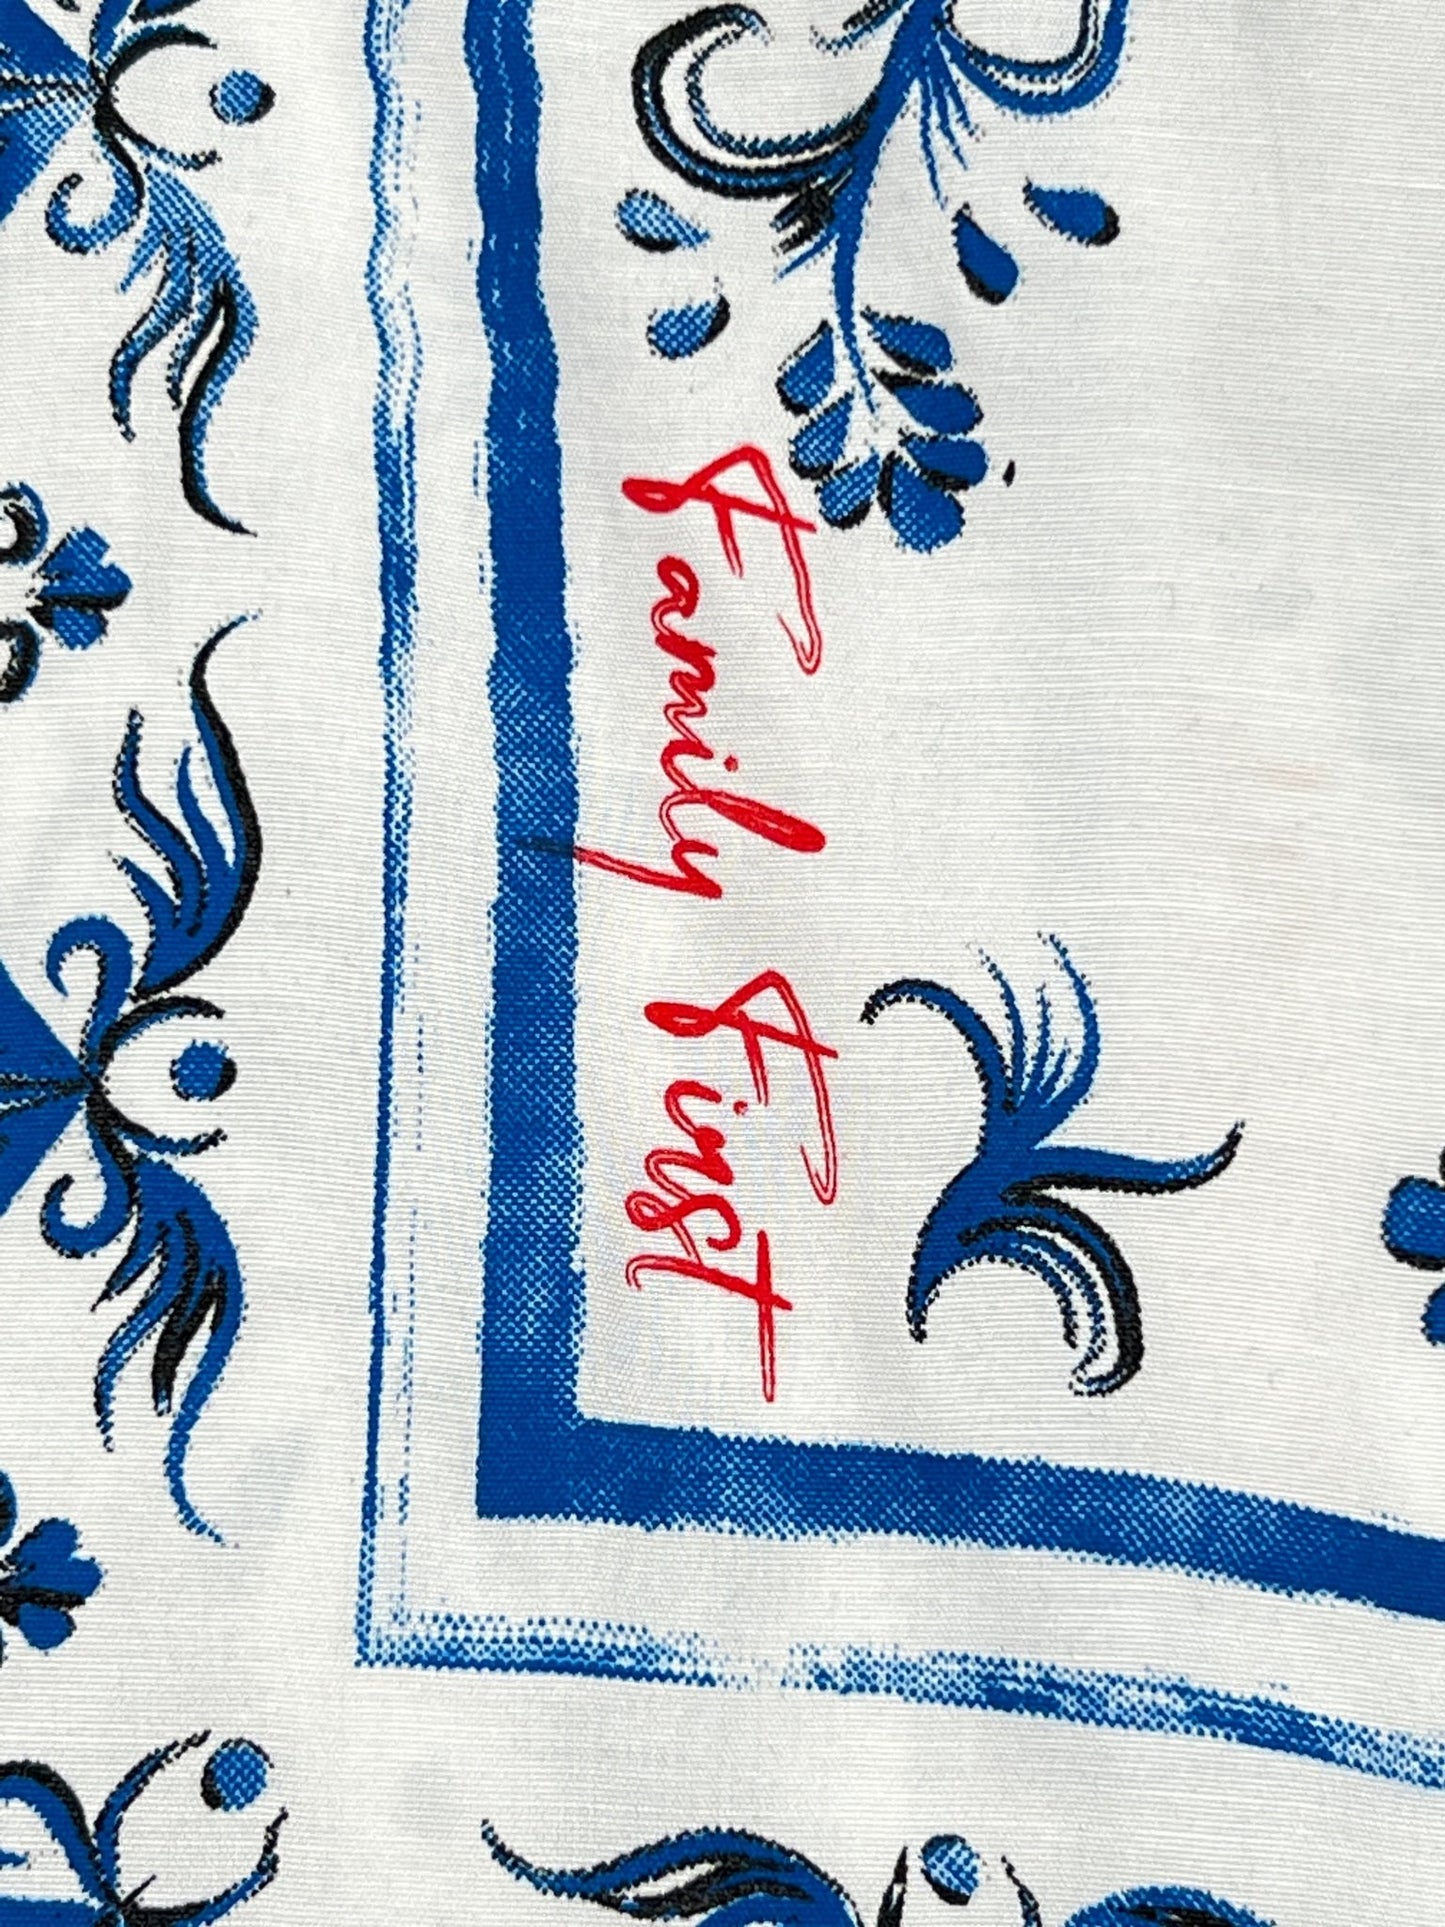 A blue and white FAMILY FIRST shirt with the word family first written on it.